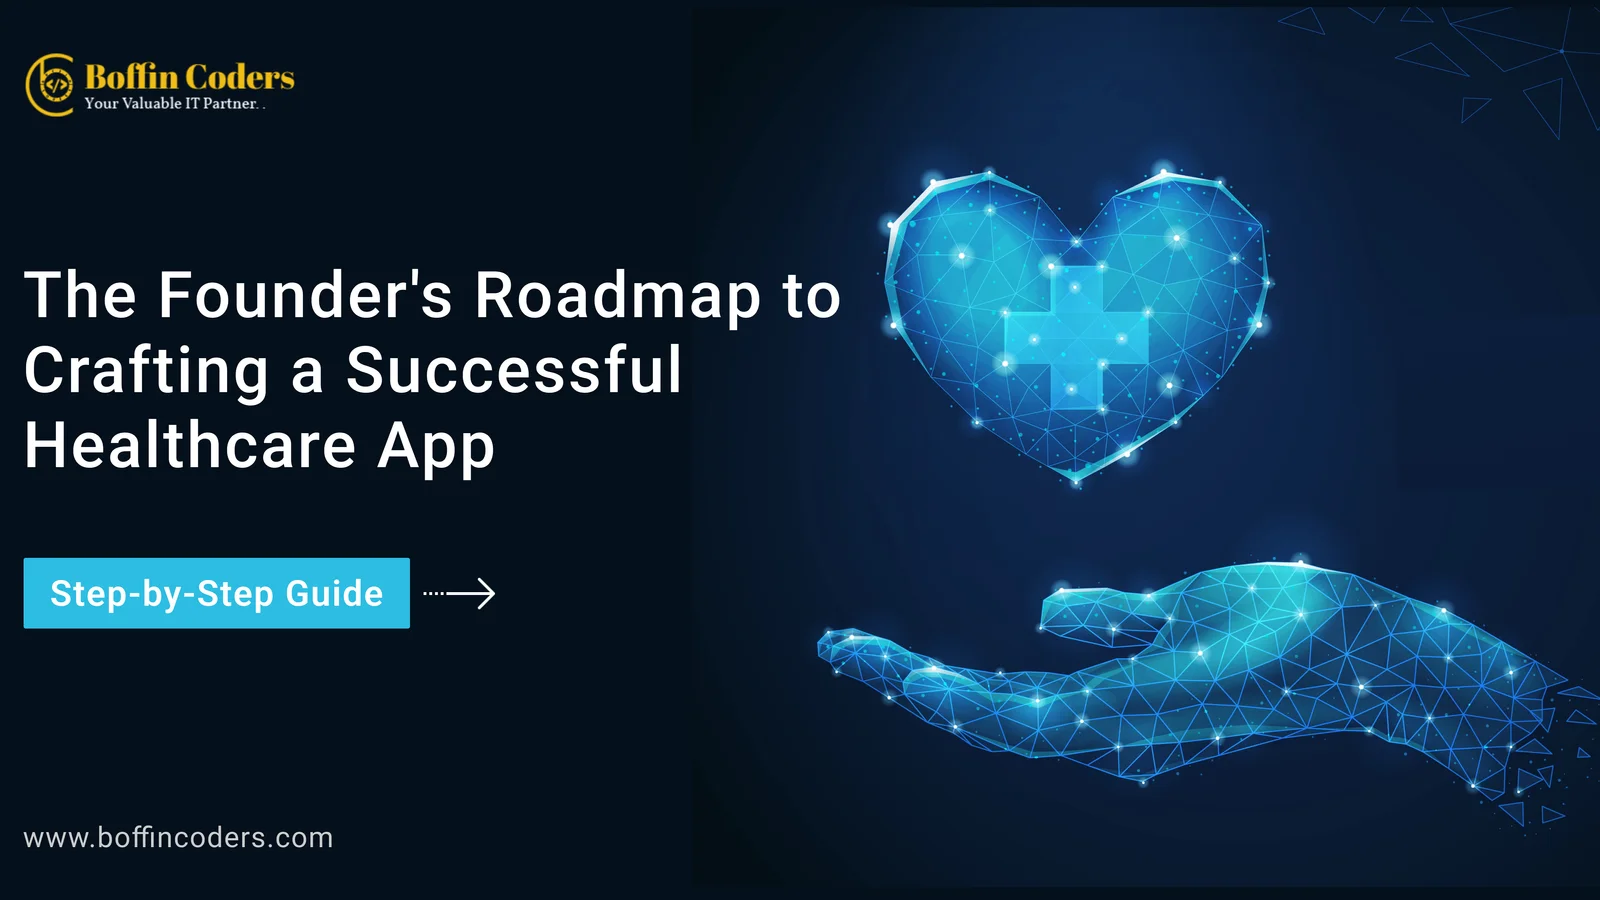 The Founder’s Roadmap to Crafting a Successful Healthcare App: Step-by-Step Guide